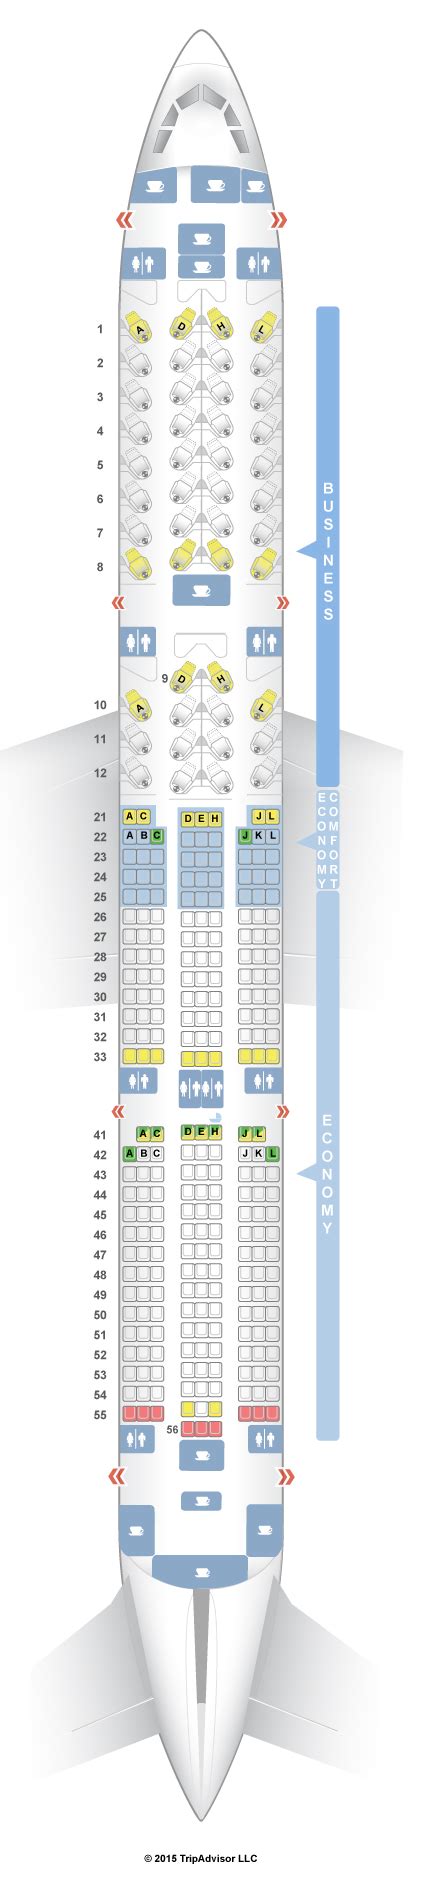 Airbus A350-900 (359) Layout 1 Seats: 48 Business 224 Economy 21 Premium Economy. Airbus A350-900 (359) Layout 2 Seats: 36 Business 262 Economy 21 Premium Economy. ... SeatGuru was created to help travelers choose the best seats and in-flight amenities. Forum; Mobile; FAQ; Contact Us; Site Map;. 